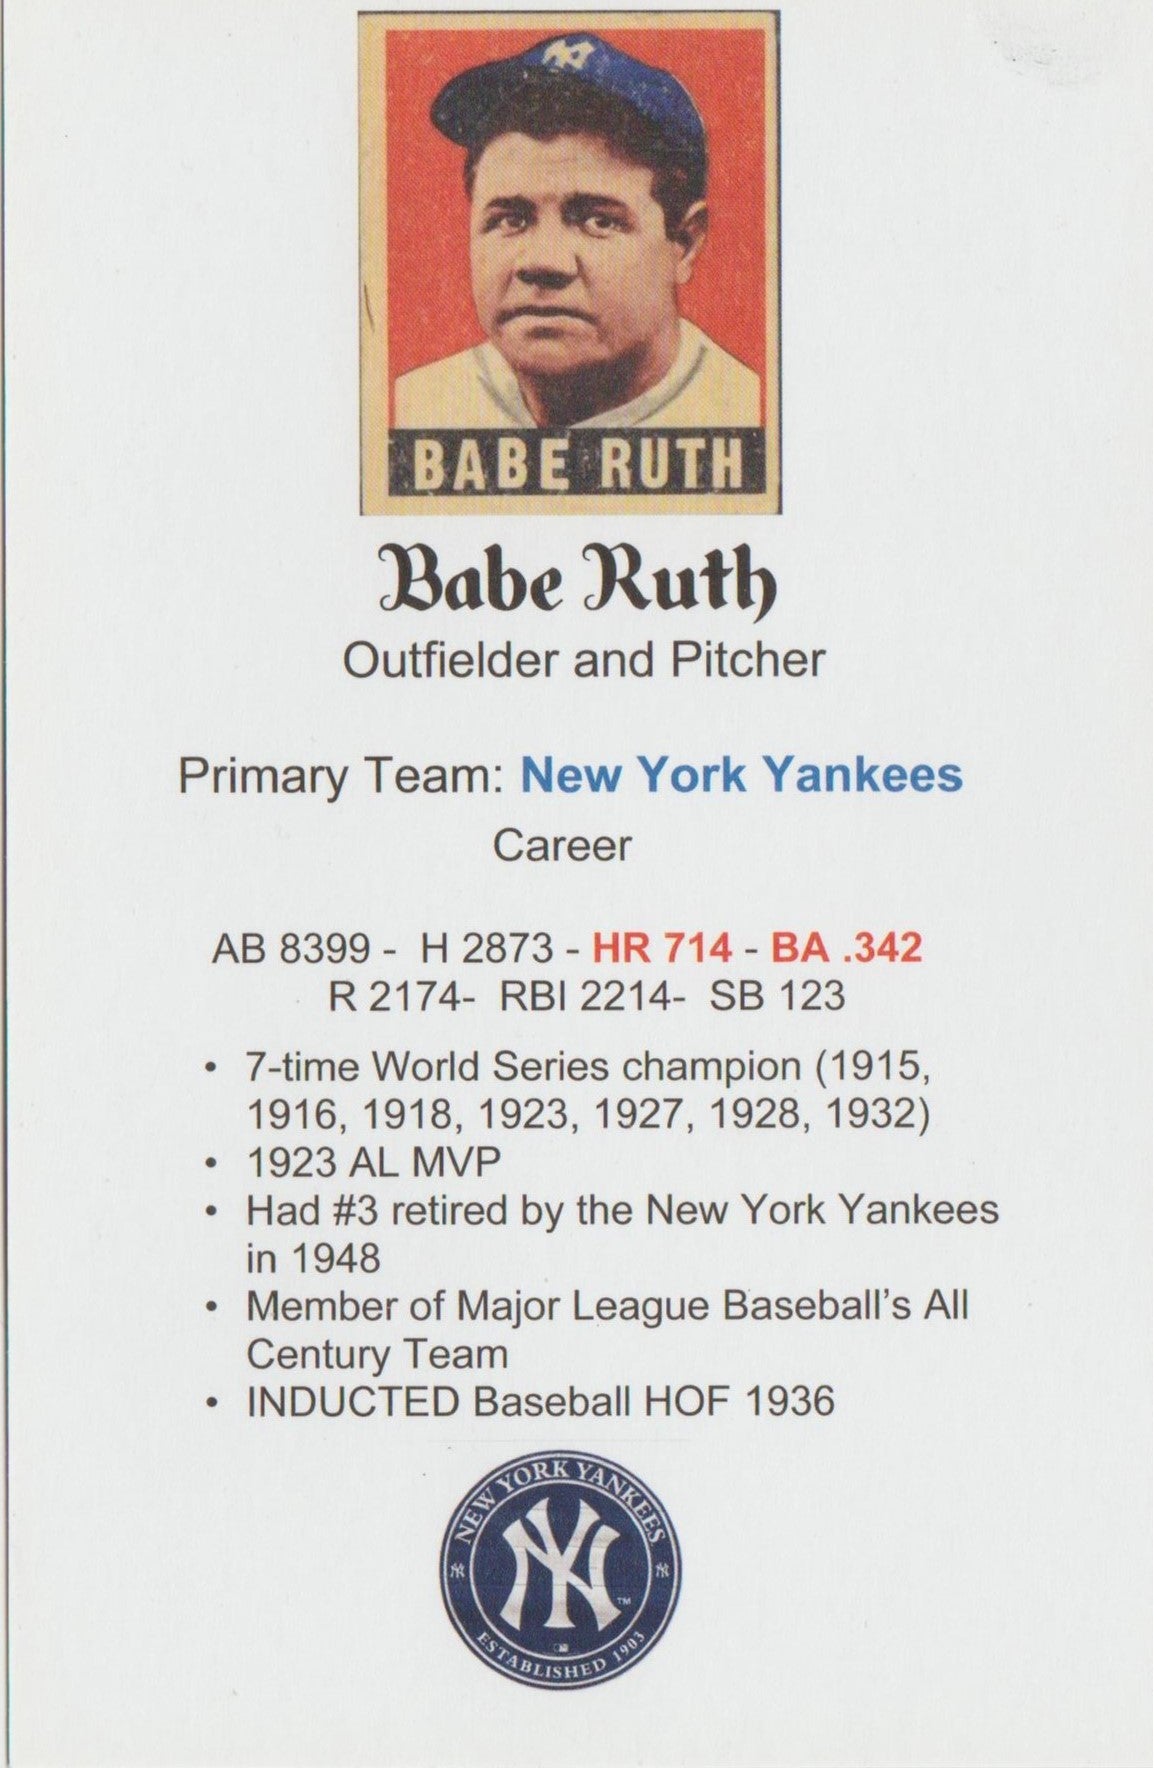 BABE RUTH -NEW YORK YANKEES  RETRO STYLE POSTCARD SIZE CARD W/CAREER STATS